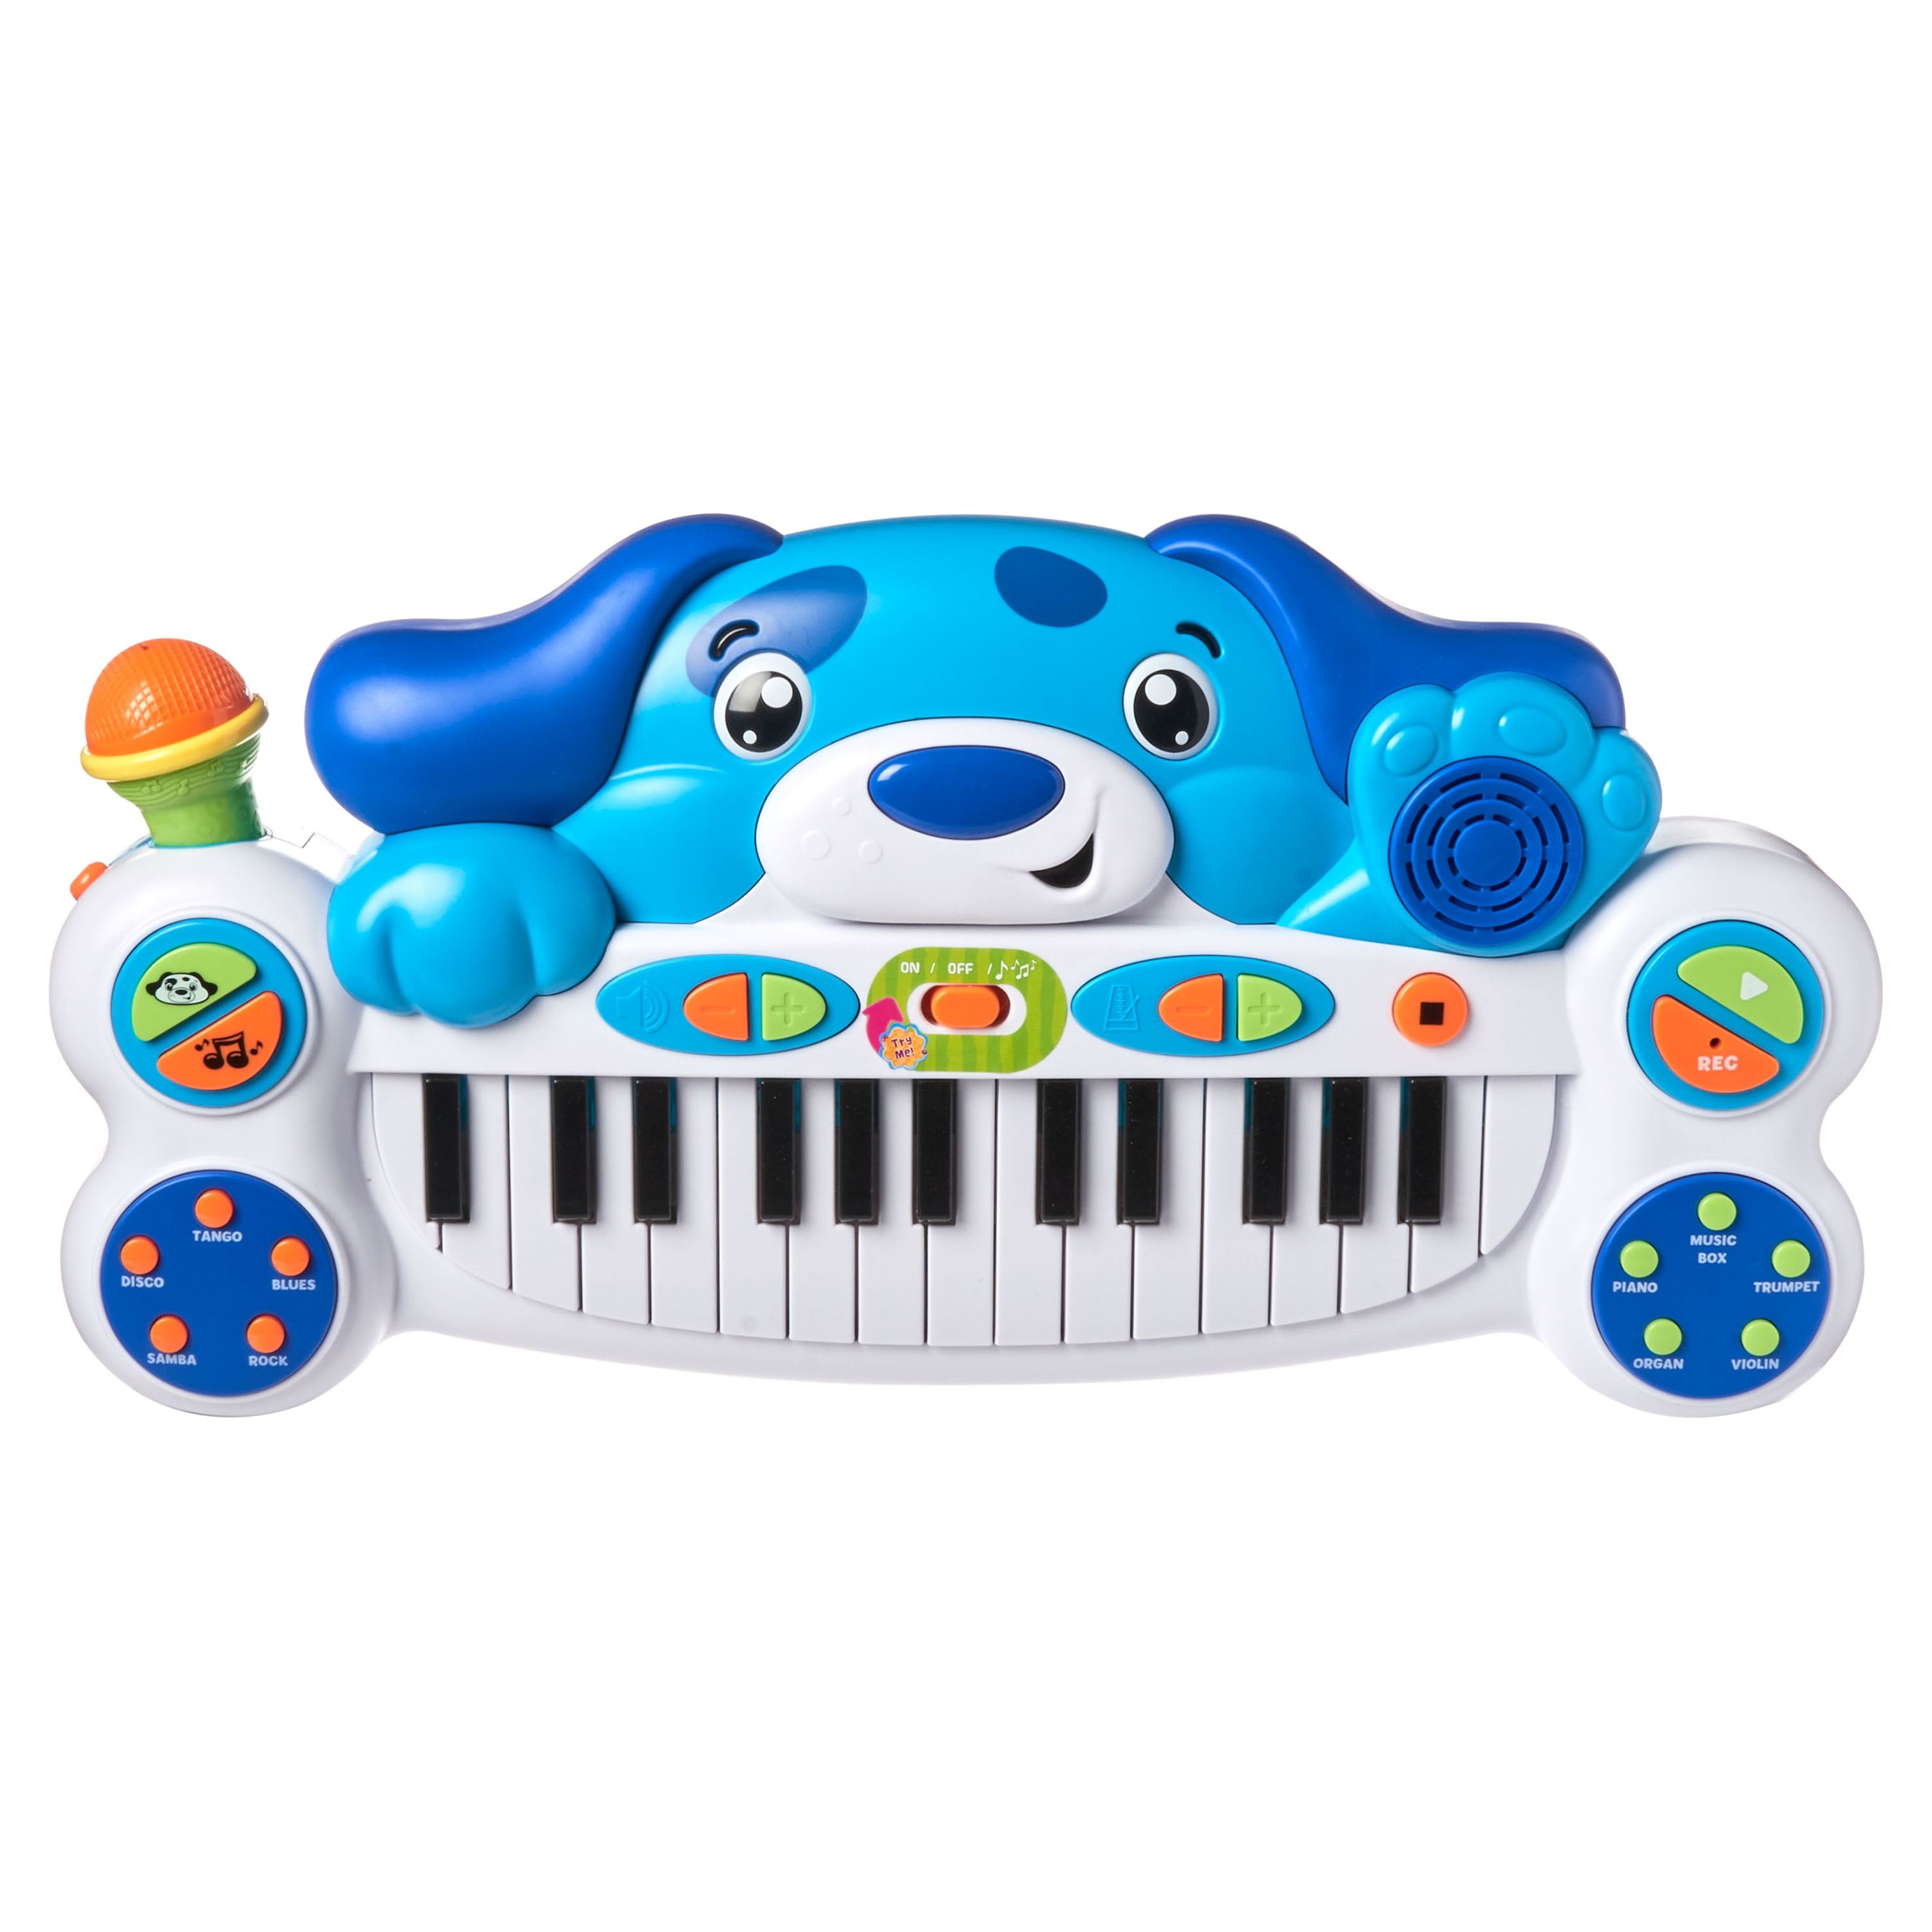 Spark Create Imagine Animal Keyboard, Toy Musical Instrument: Puppy Piano, 24 Month+, Child - image 3 of 6